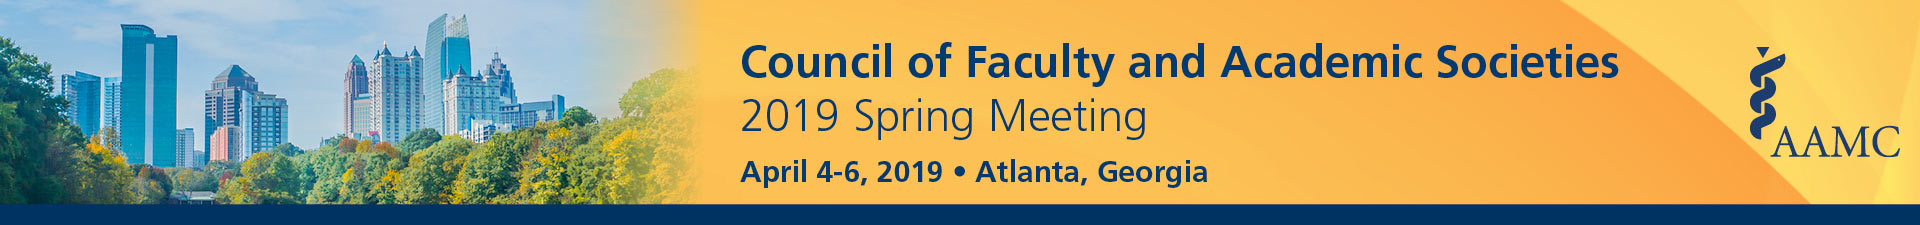 2019 Council of Faculty and Academic Societies (CFAS) Event Banner